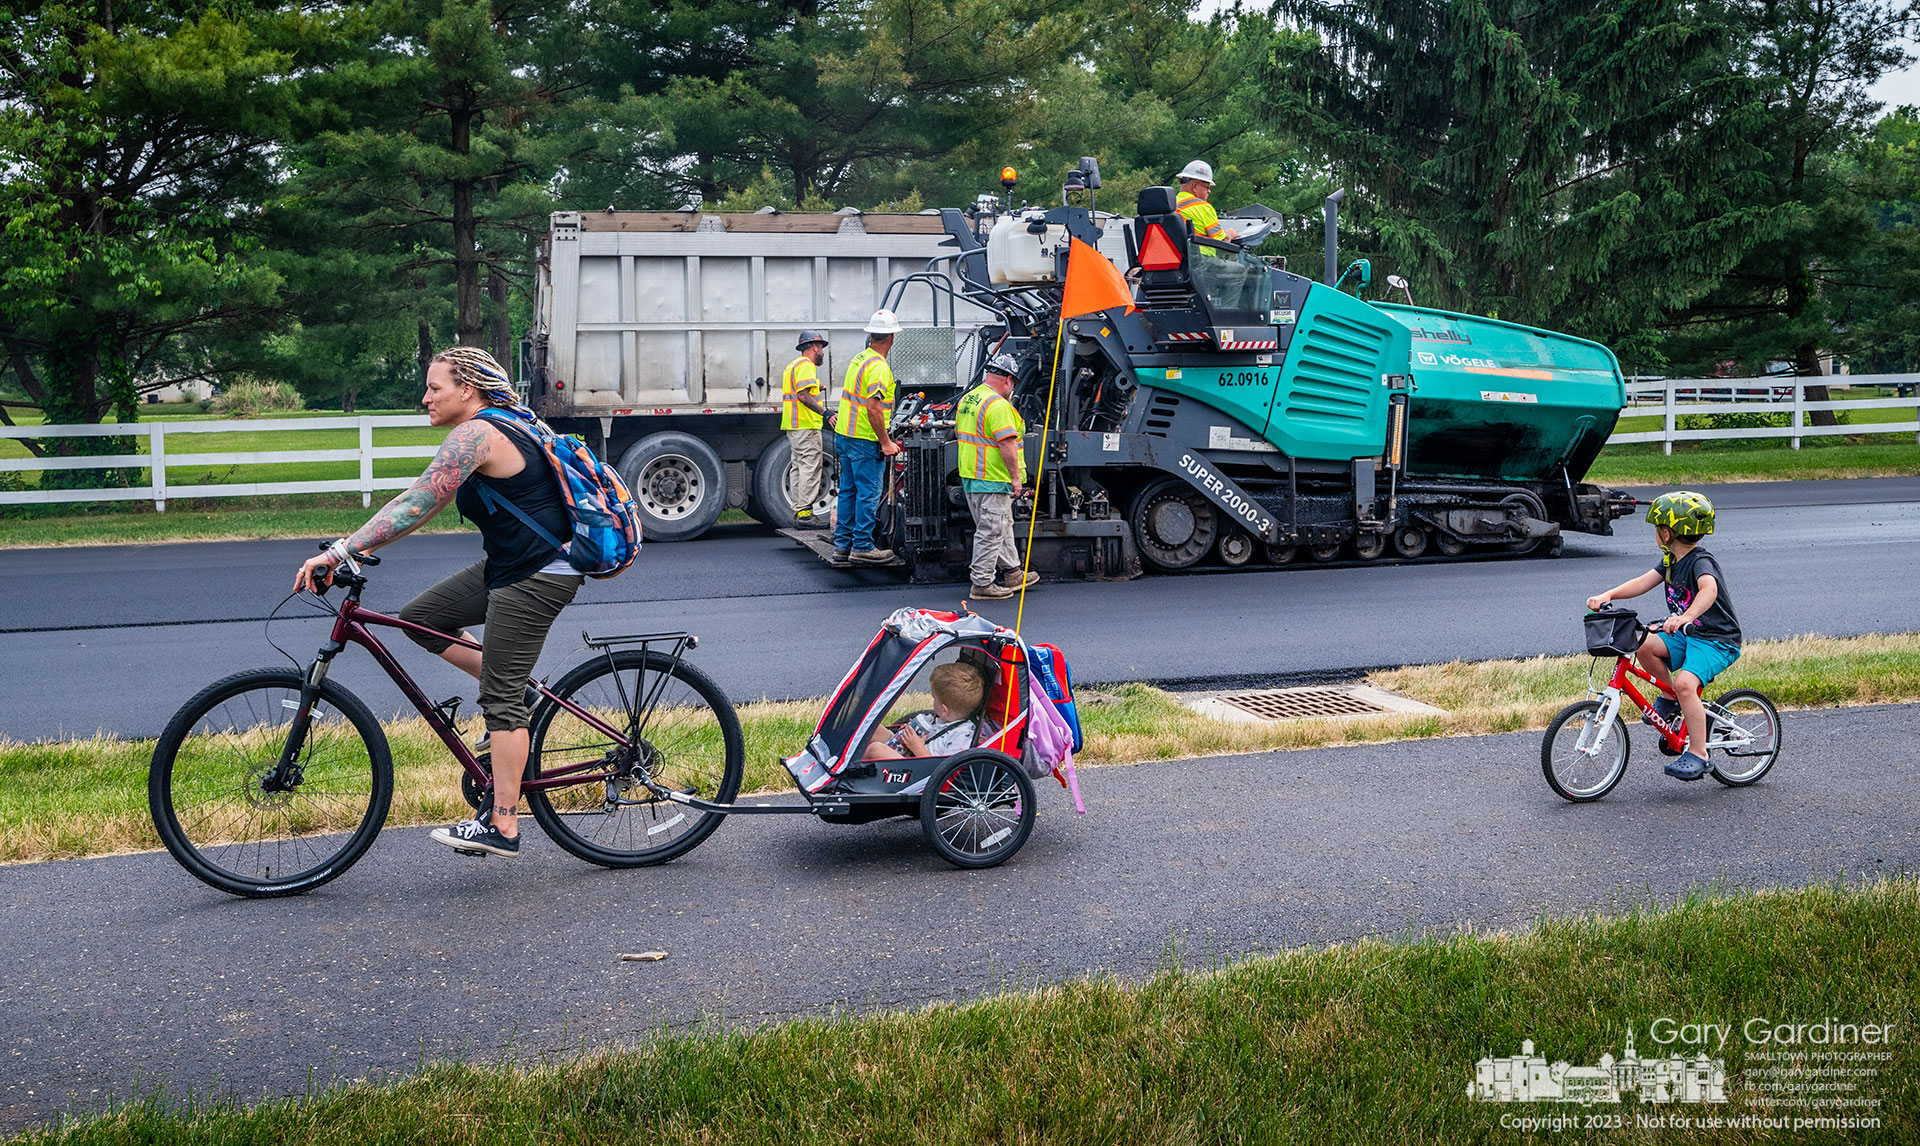 An entourage of parents and children ride their bikes past a paving company laying asphalt on Maxtown Road in Genoa Township. My Final Photo for June 8, 2023.